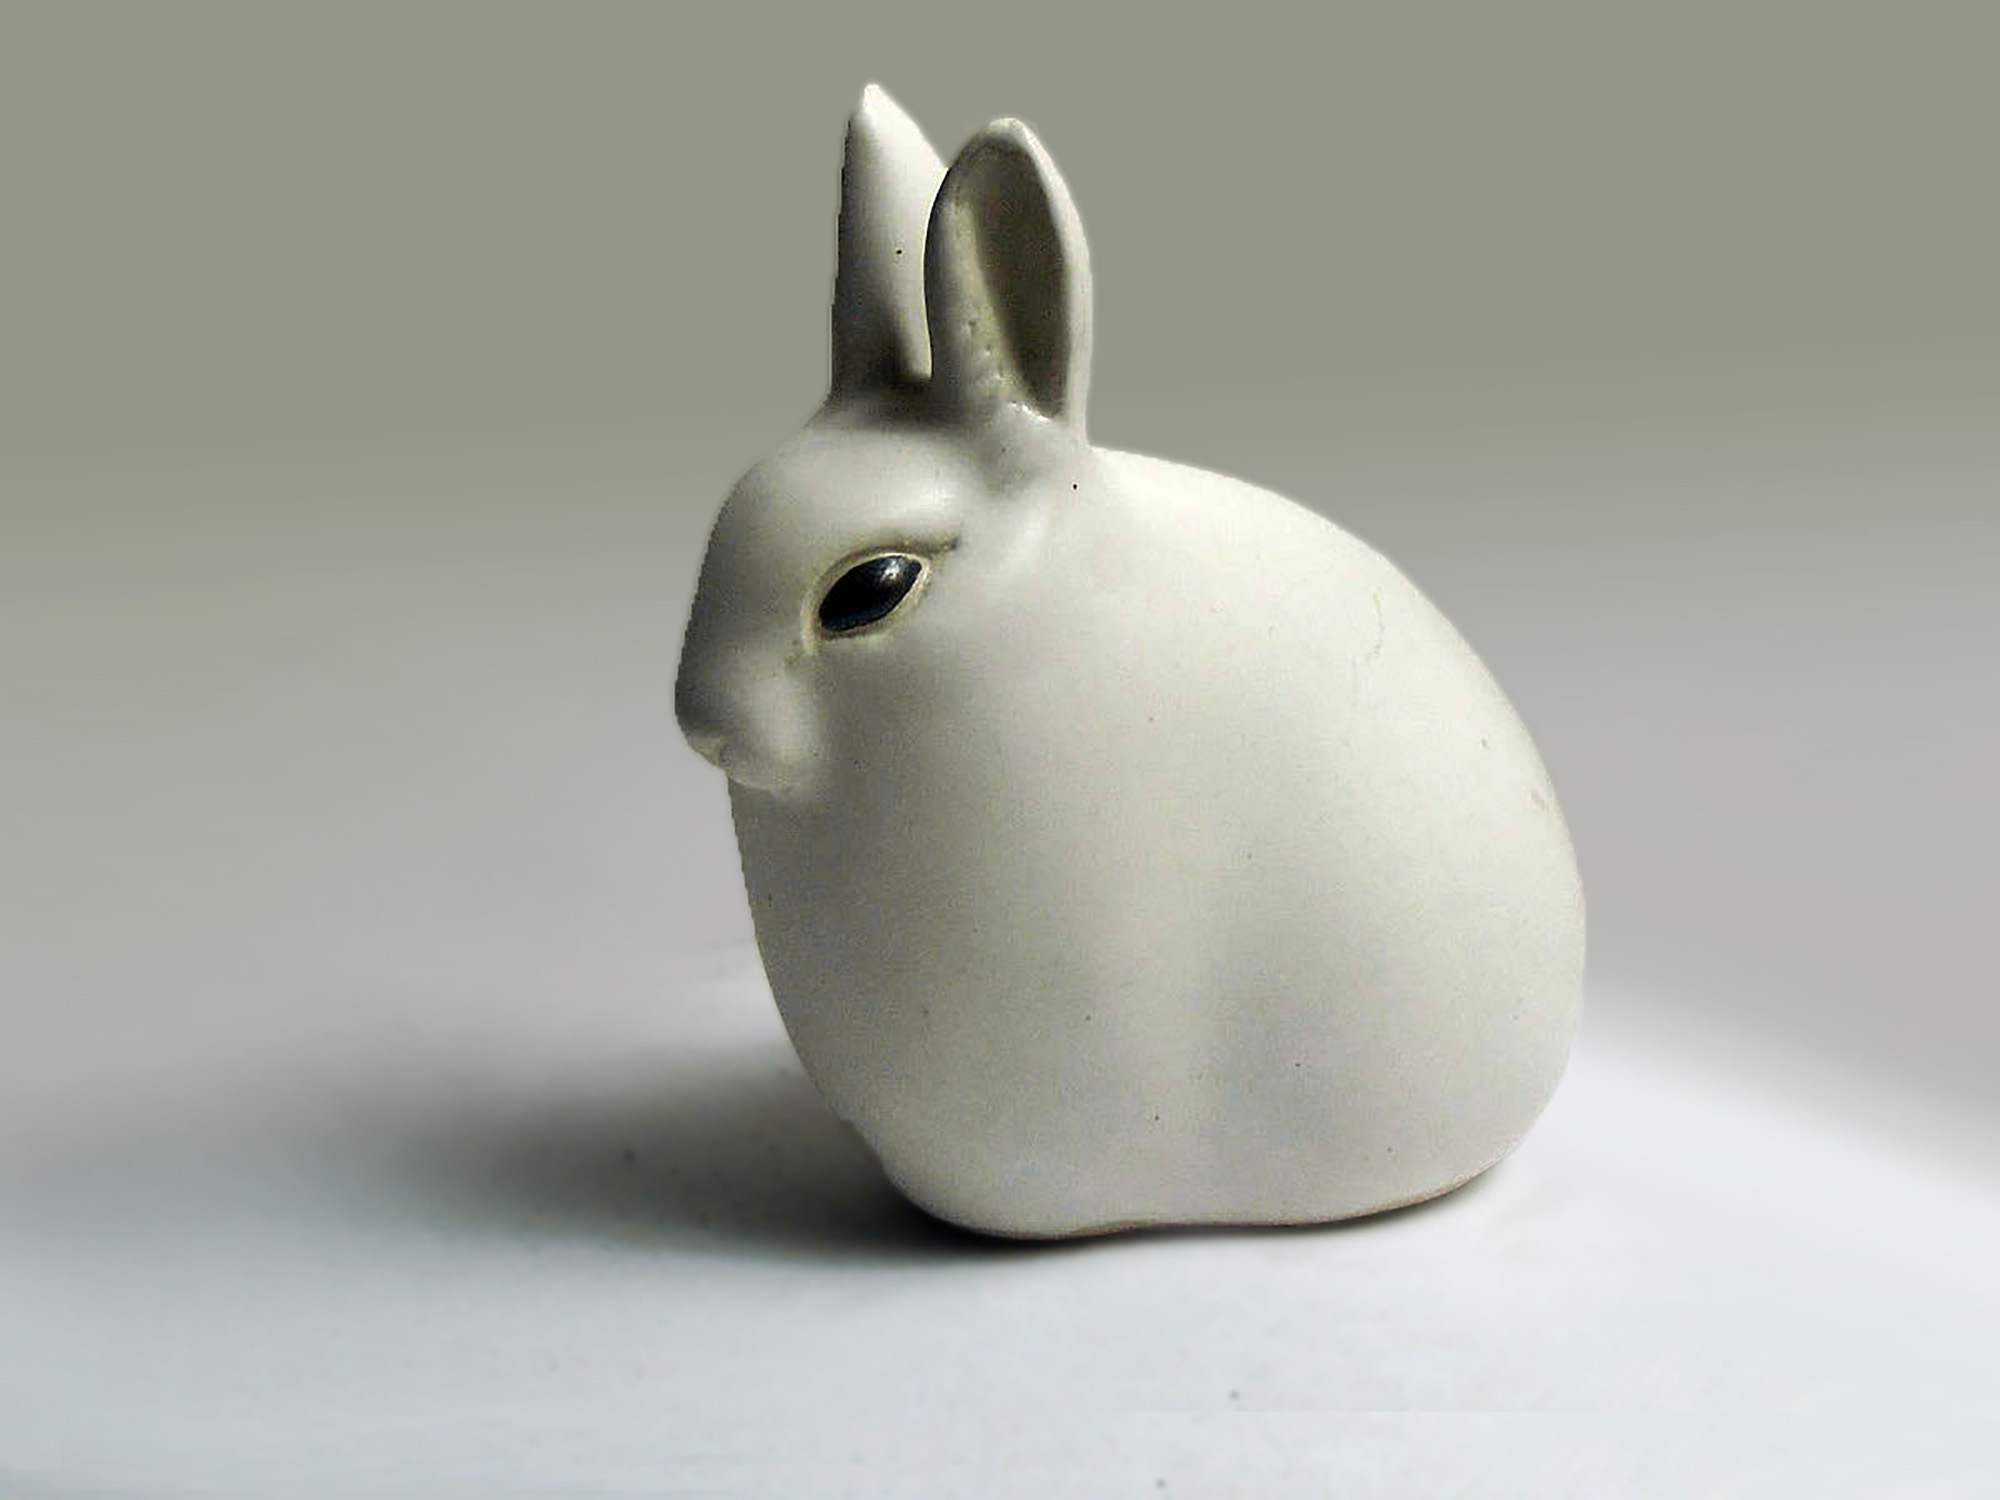 Hare with Ears Up in White